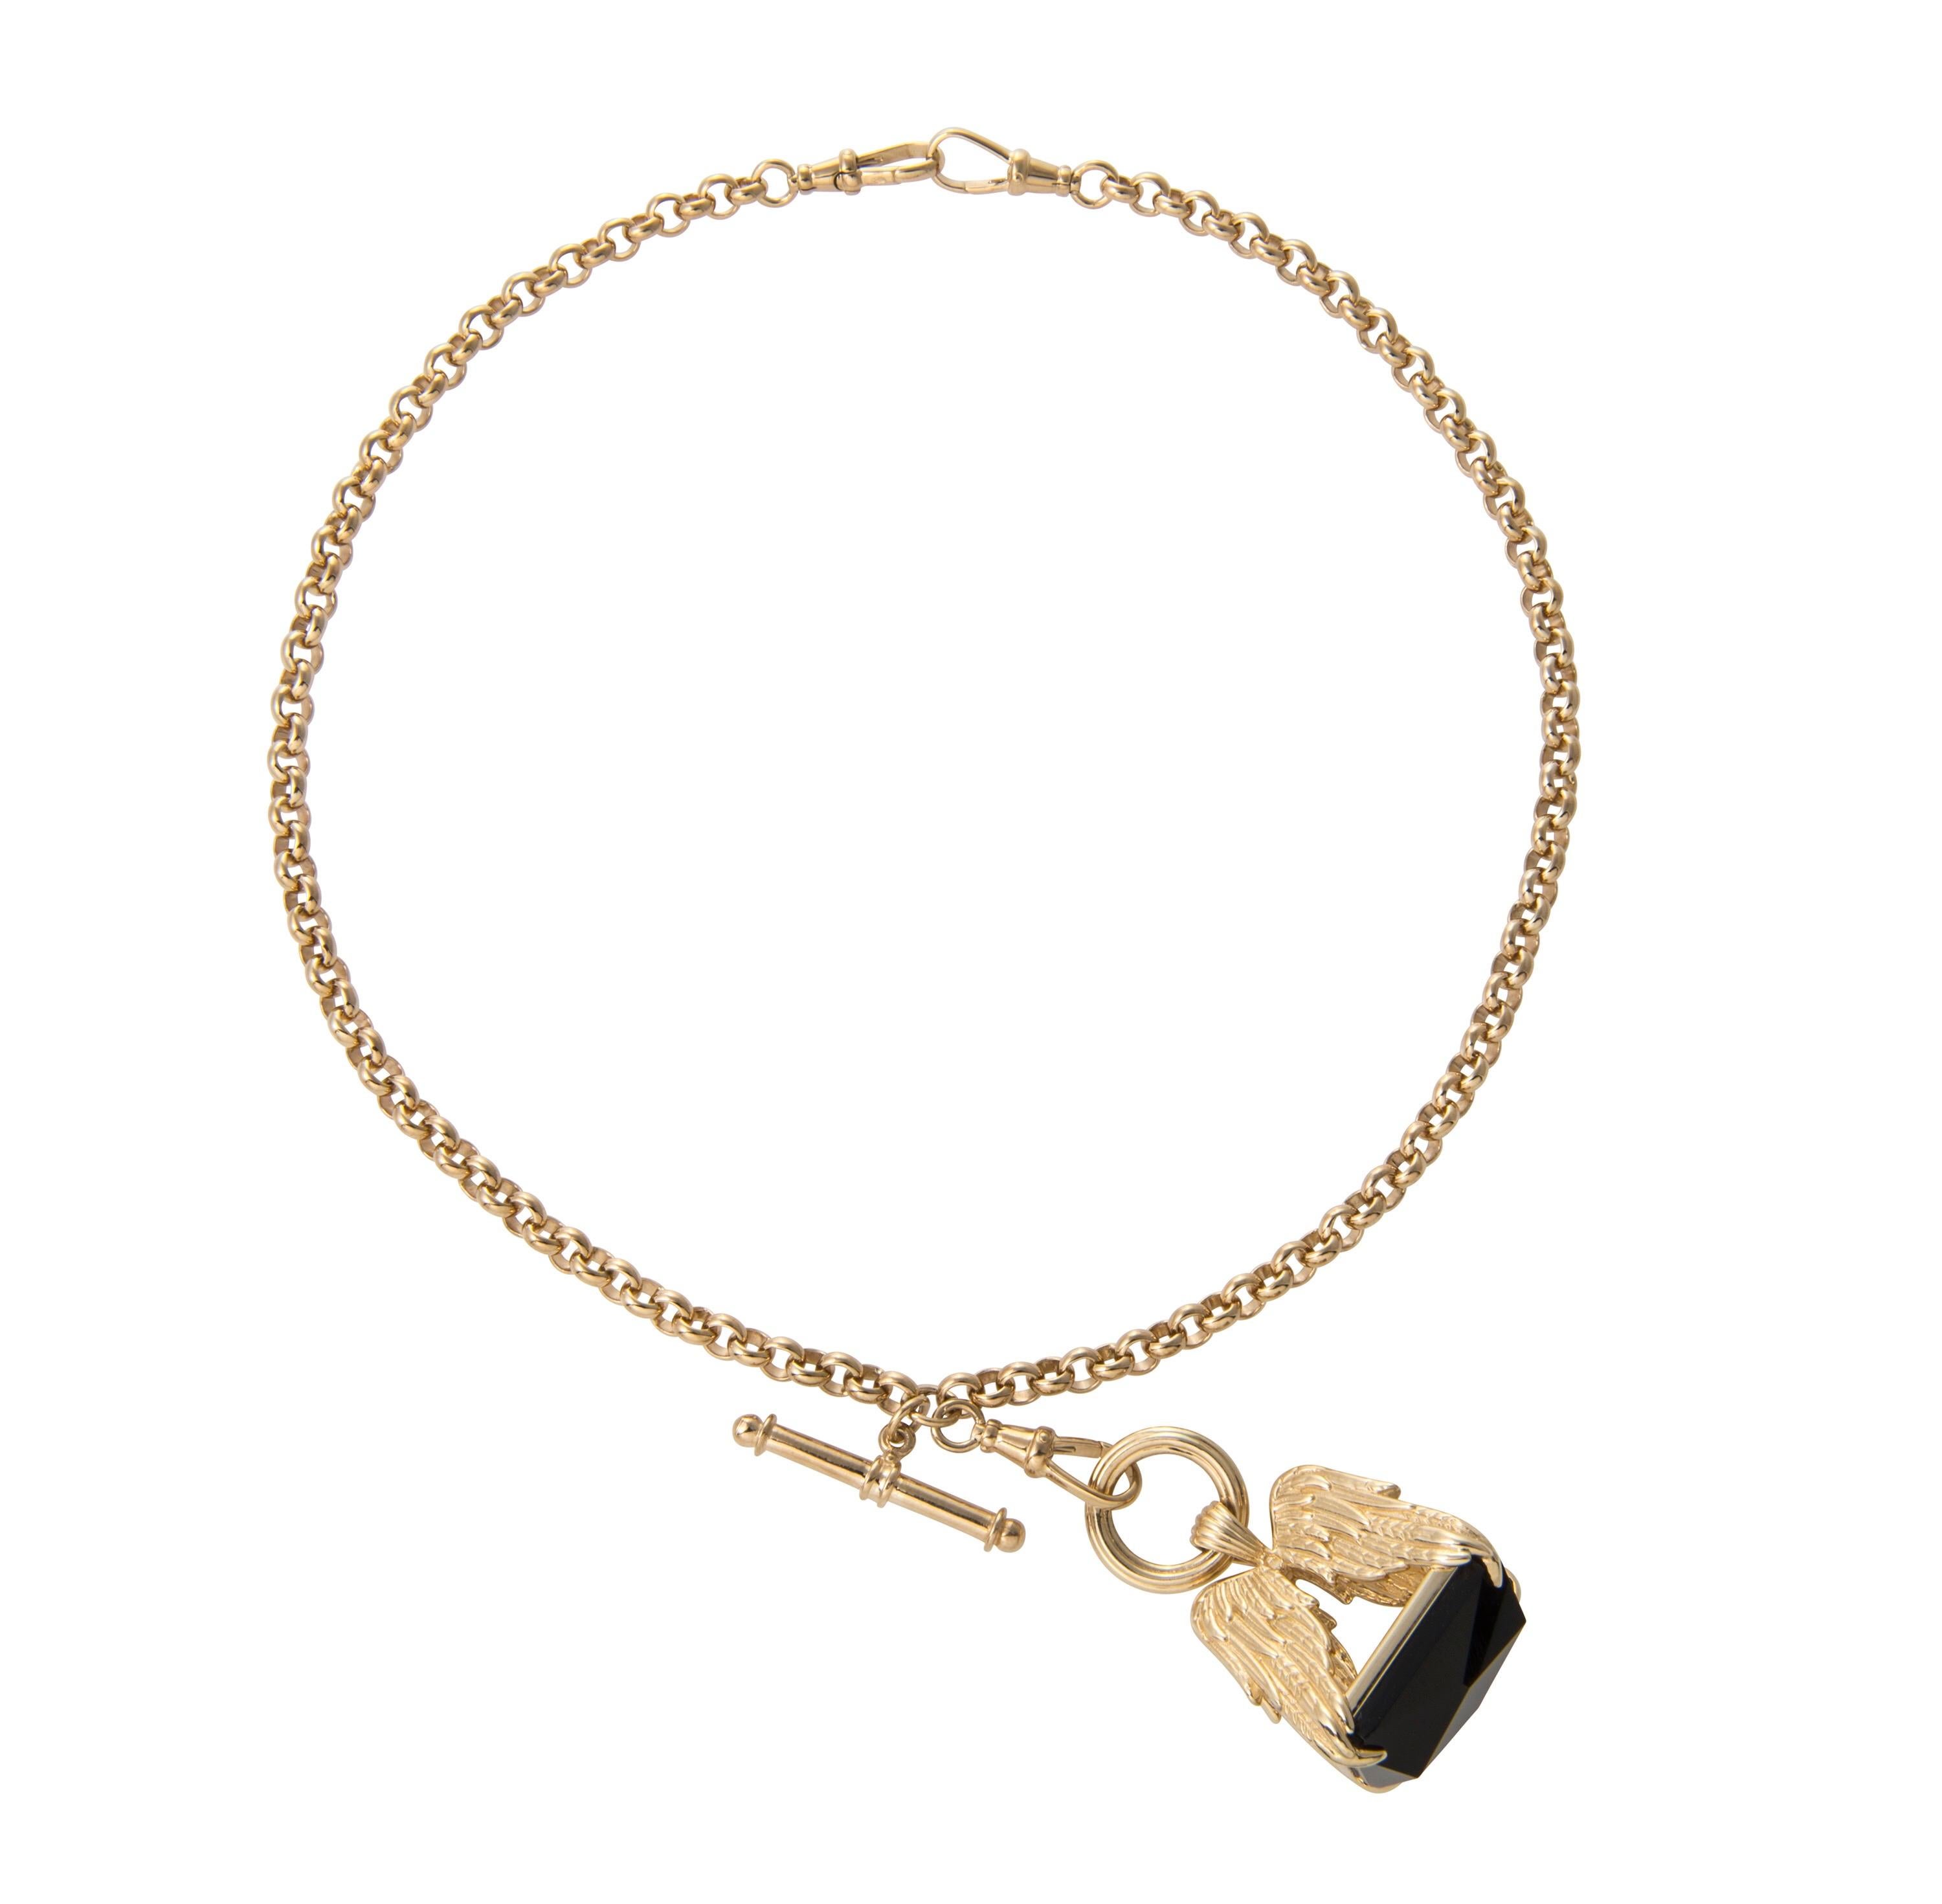 Dudley VanDyke Jumbo Rolo Double Albert chain in 14K yellow gold featuring 3 swivel clasps and a lovely solid gold T-Bar.  This yellow gold necklace, inspired by antique European watch fobs and chains, can be worn as a necklace or fashioned as a